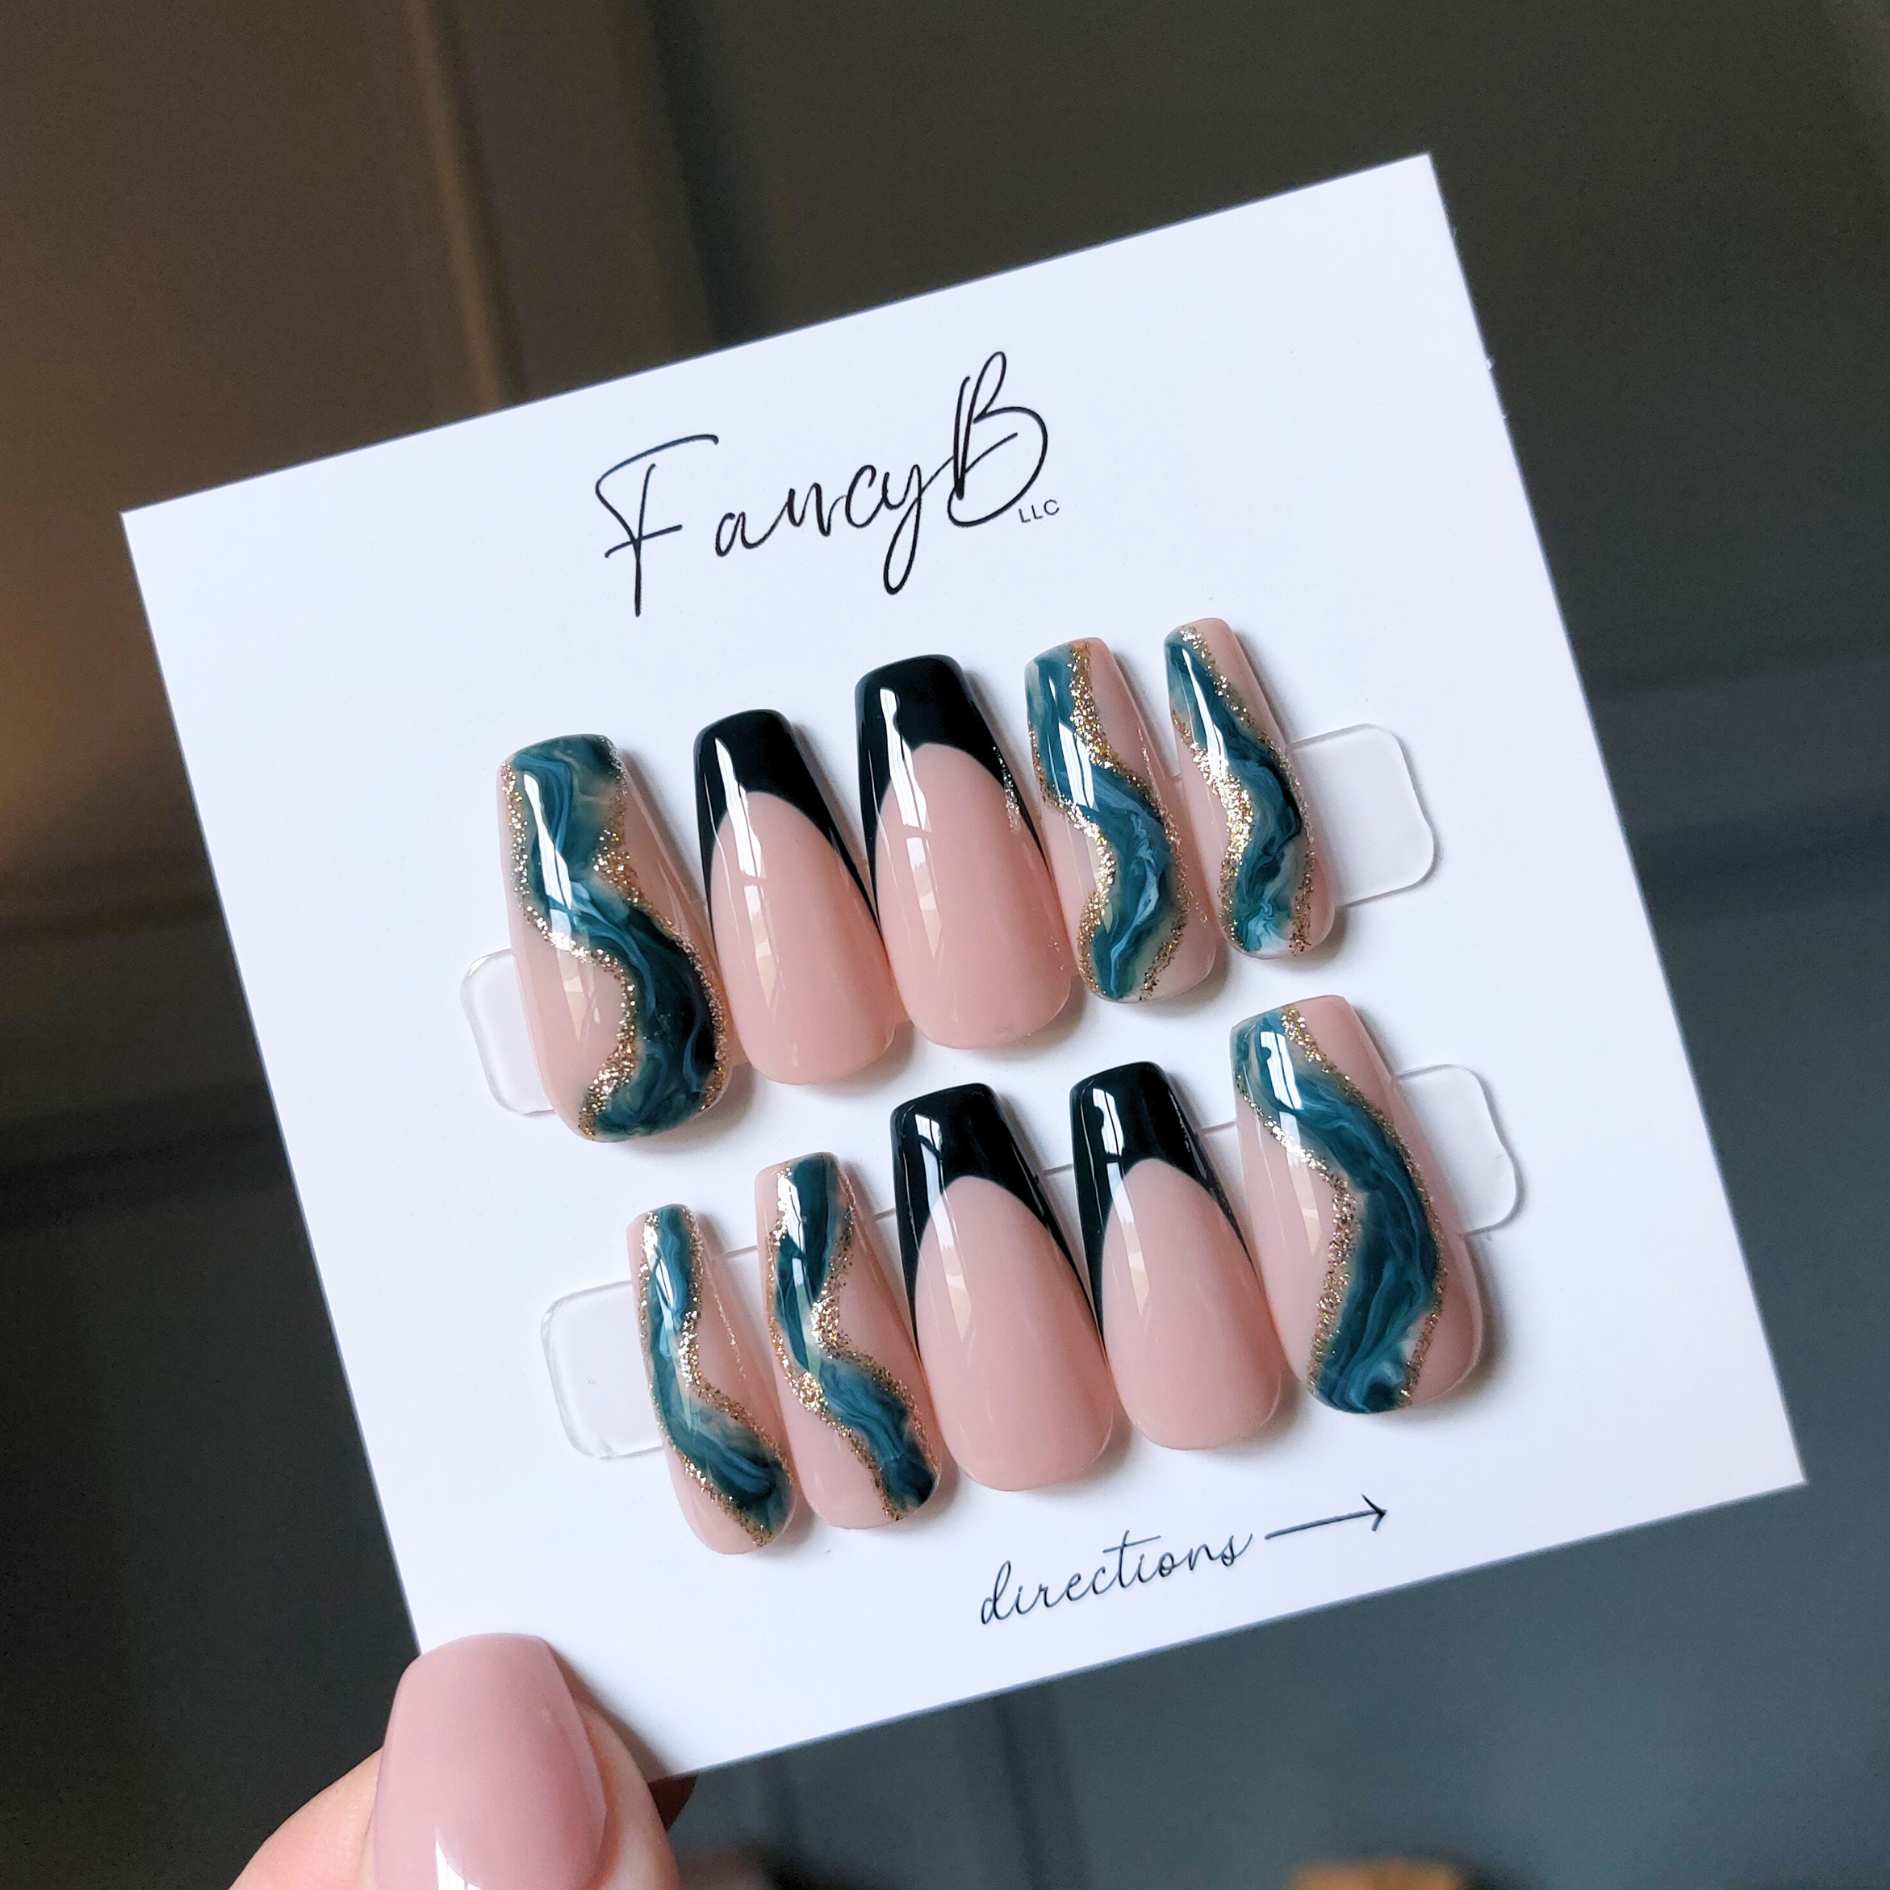 Custom marble nails with teal designs and teal french accents with gold glitter on medium coffin nails from fancyb nails